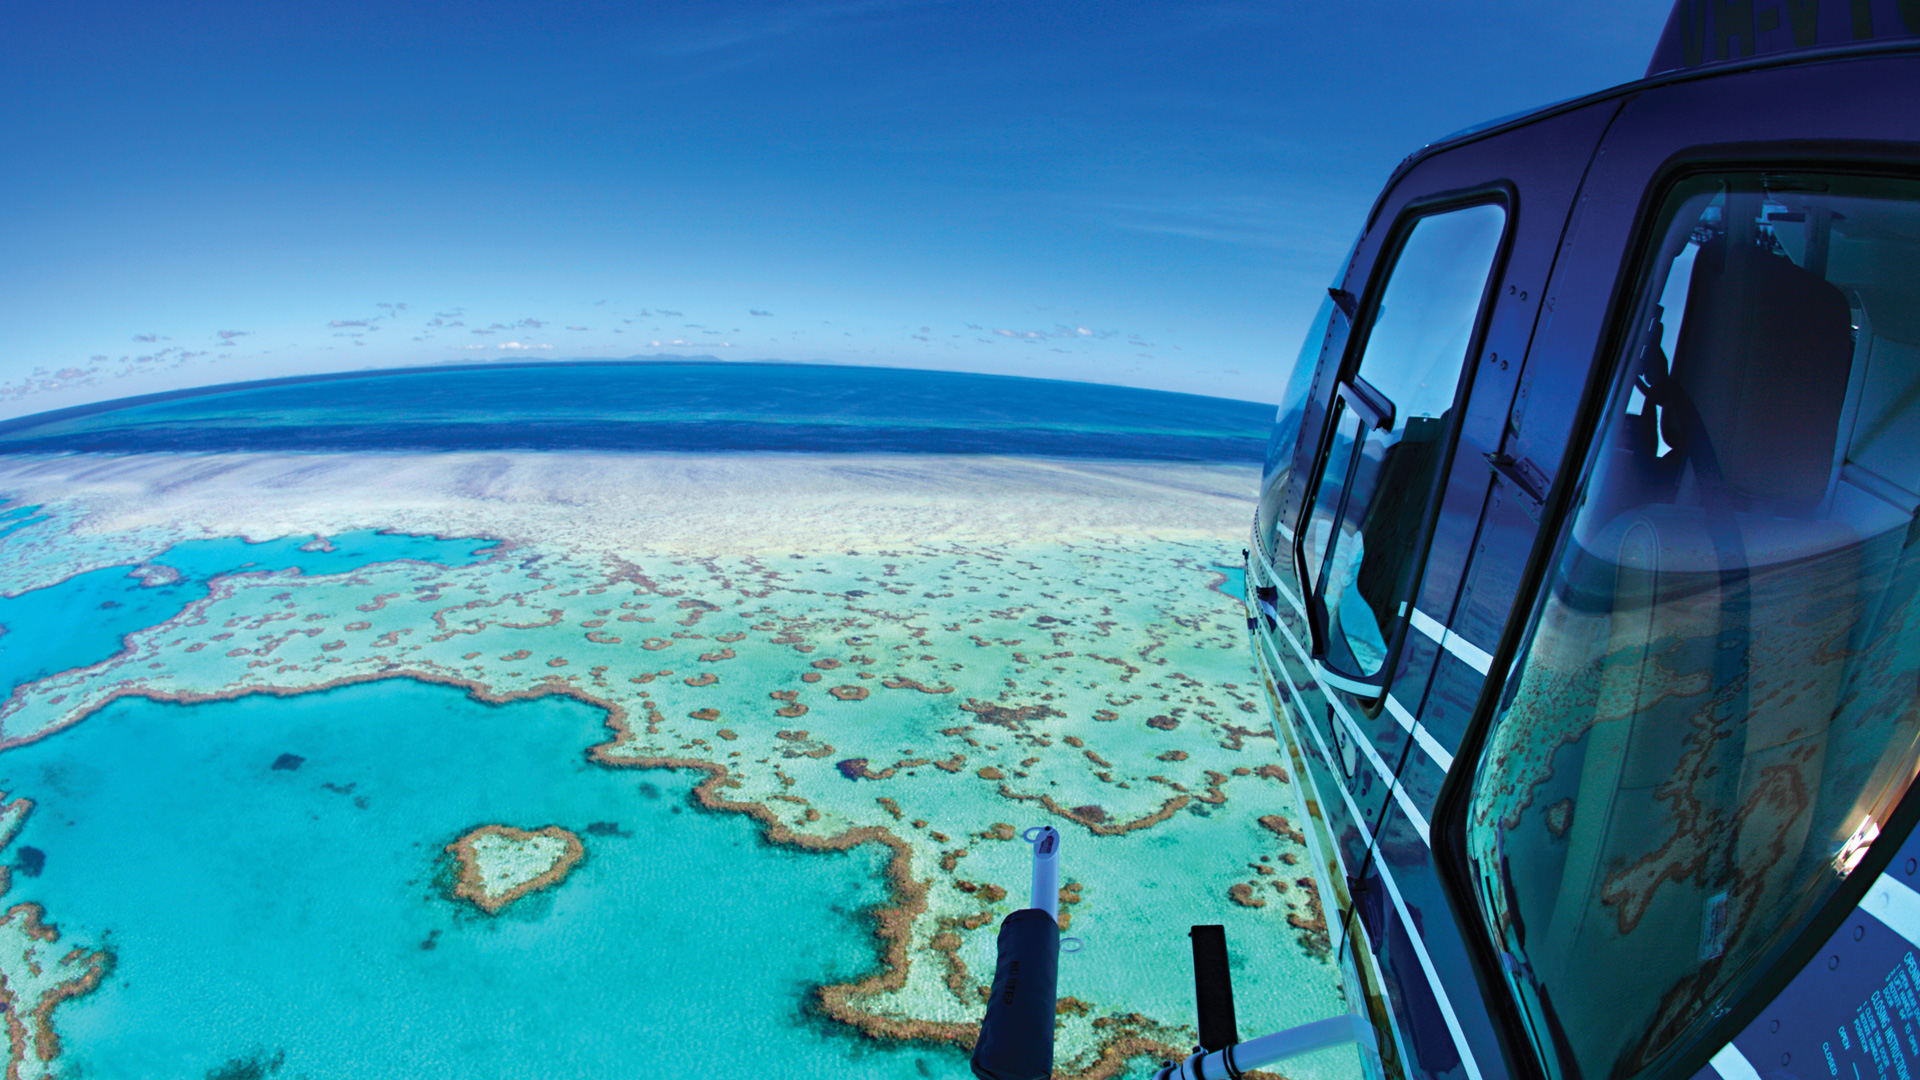 10 Reasons To Visit The Great Barrier Reef Heart Reef